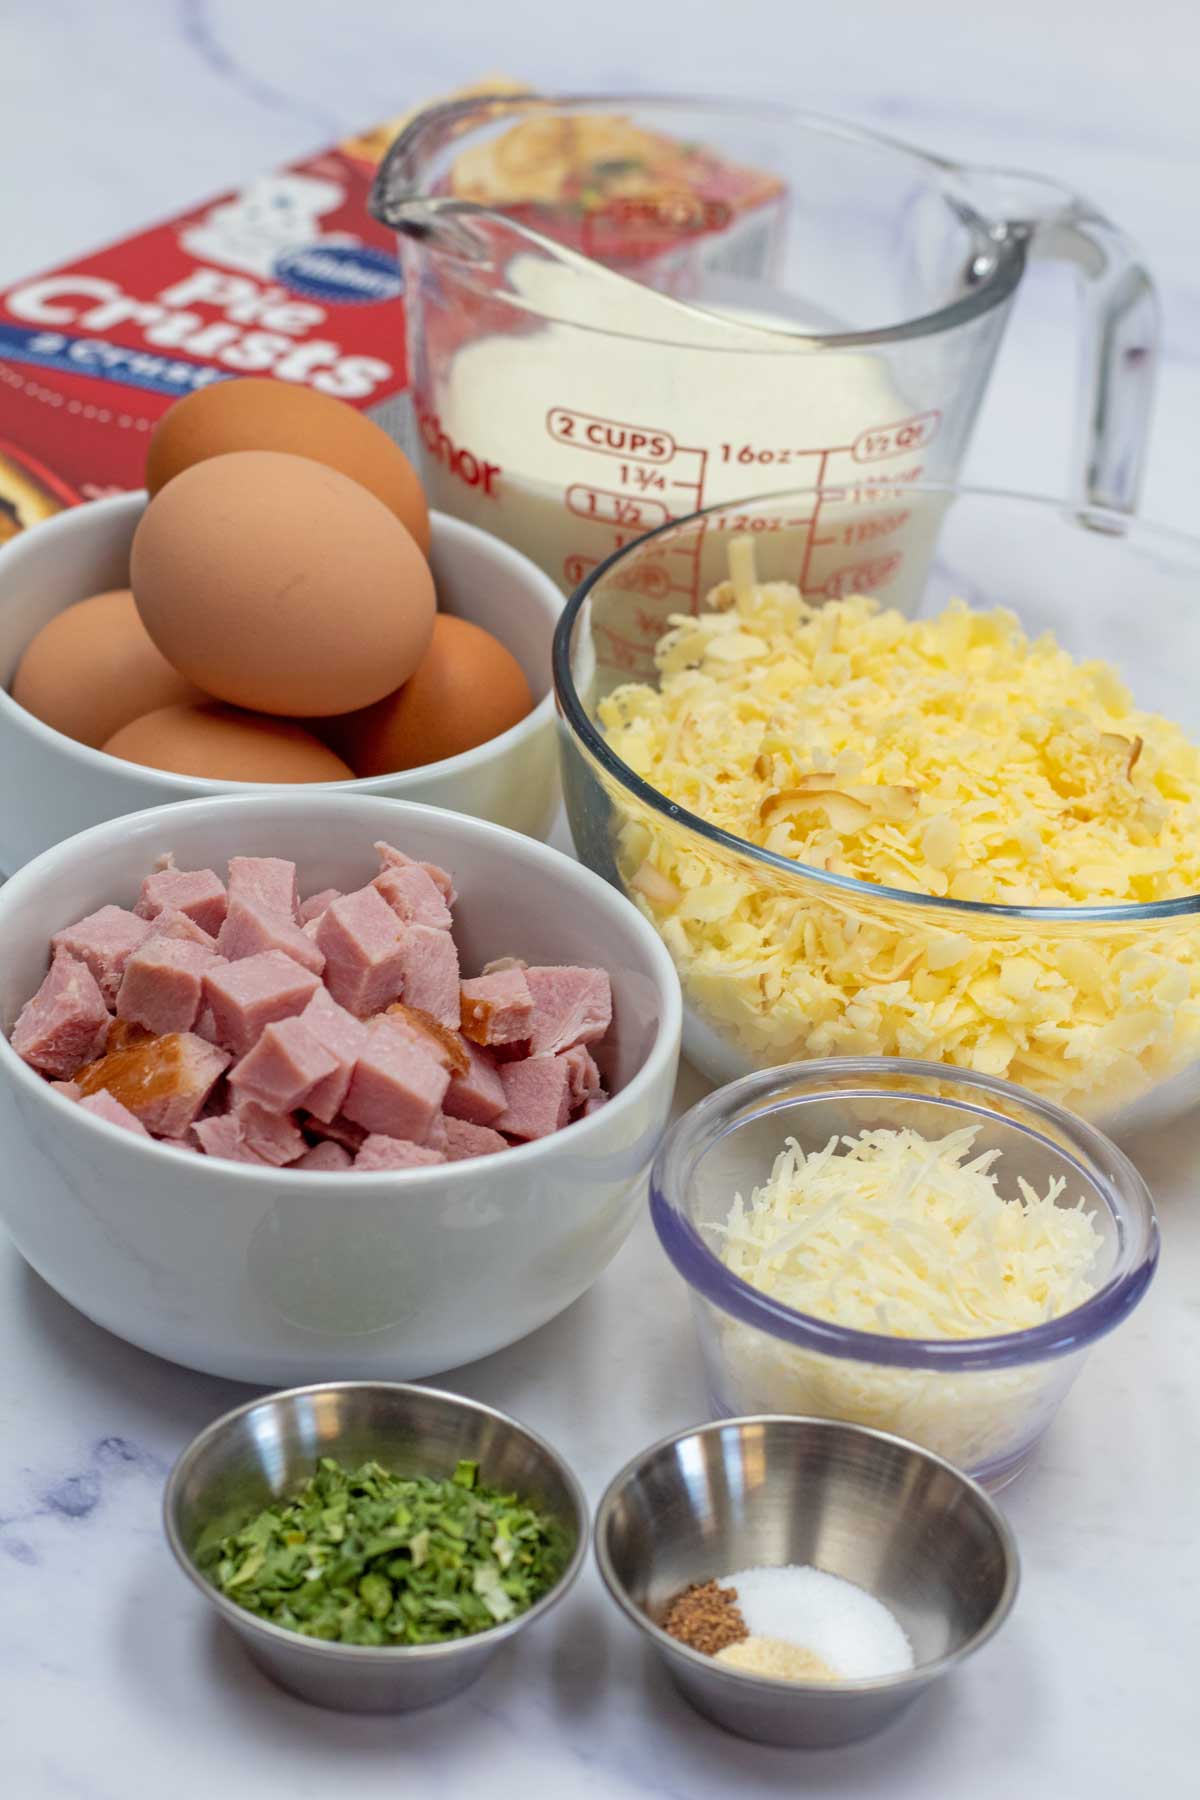 Tall image showing ham and cheese quiche ingredients.